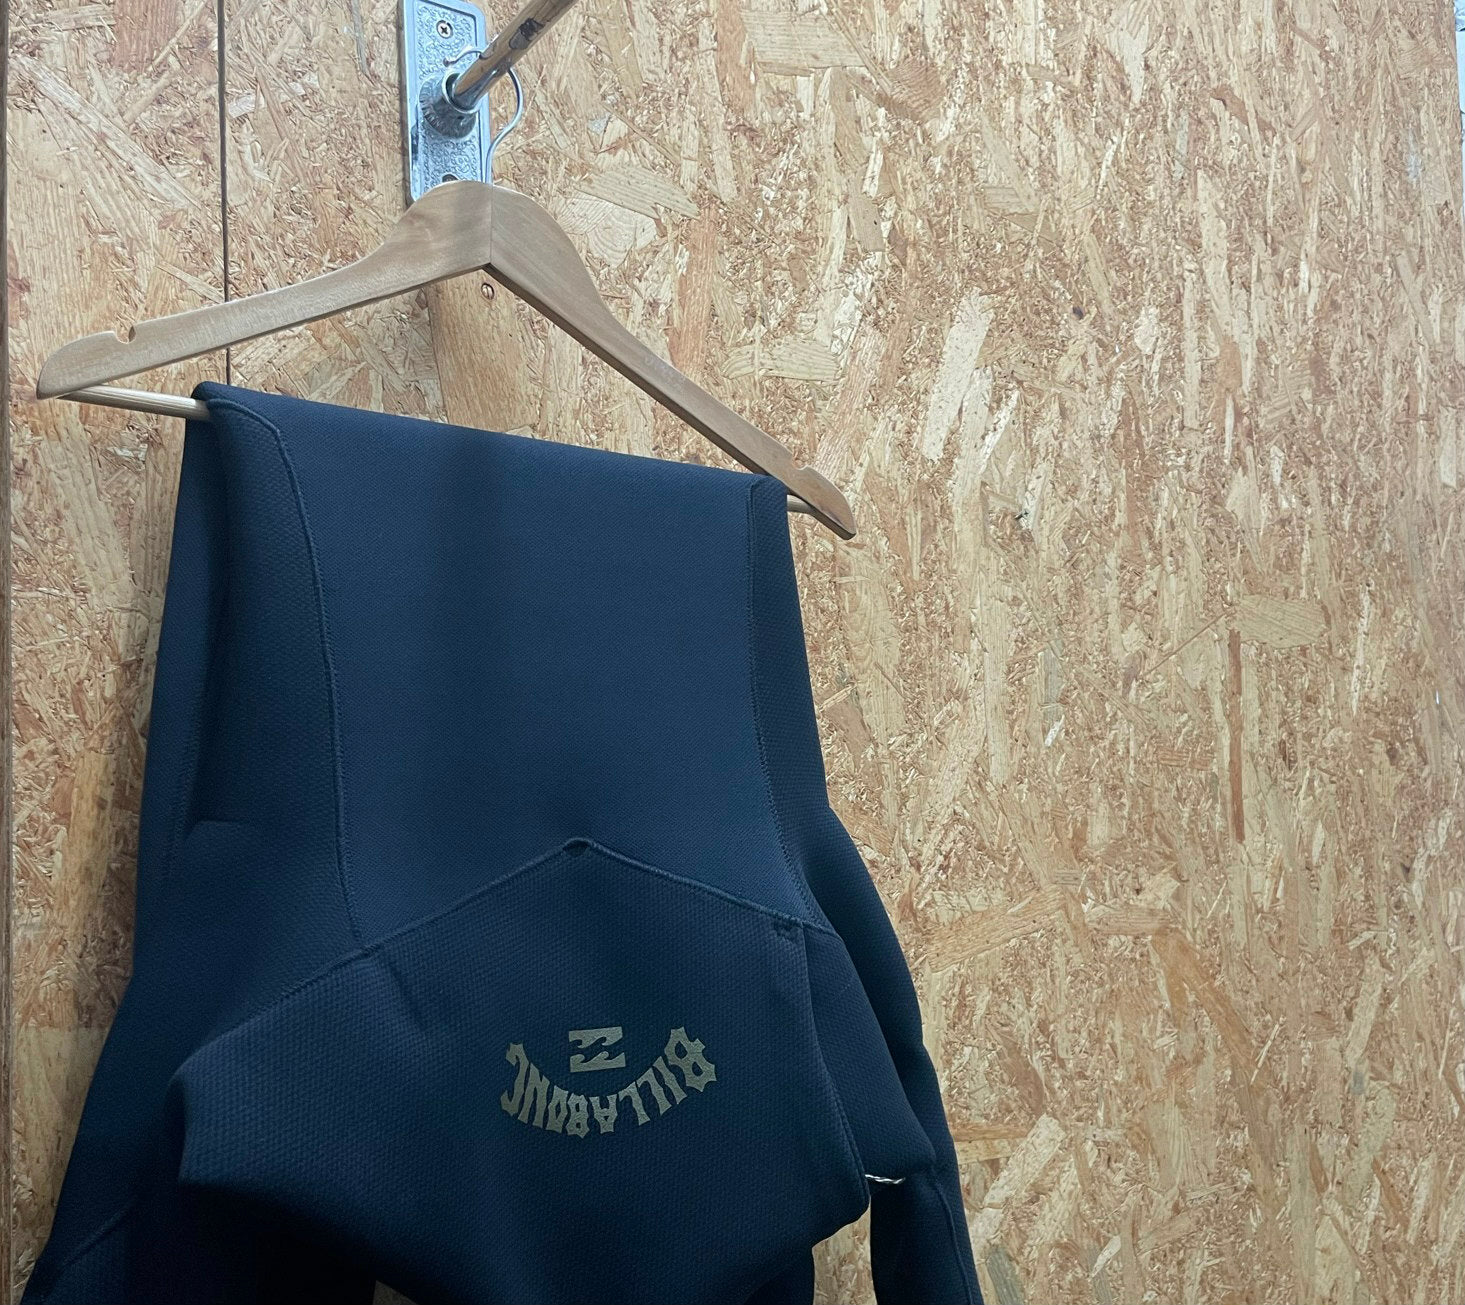 Wetsuit hung off lower rung of hanger (Wetsuit Care Guide)